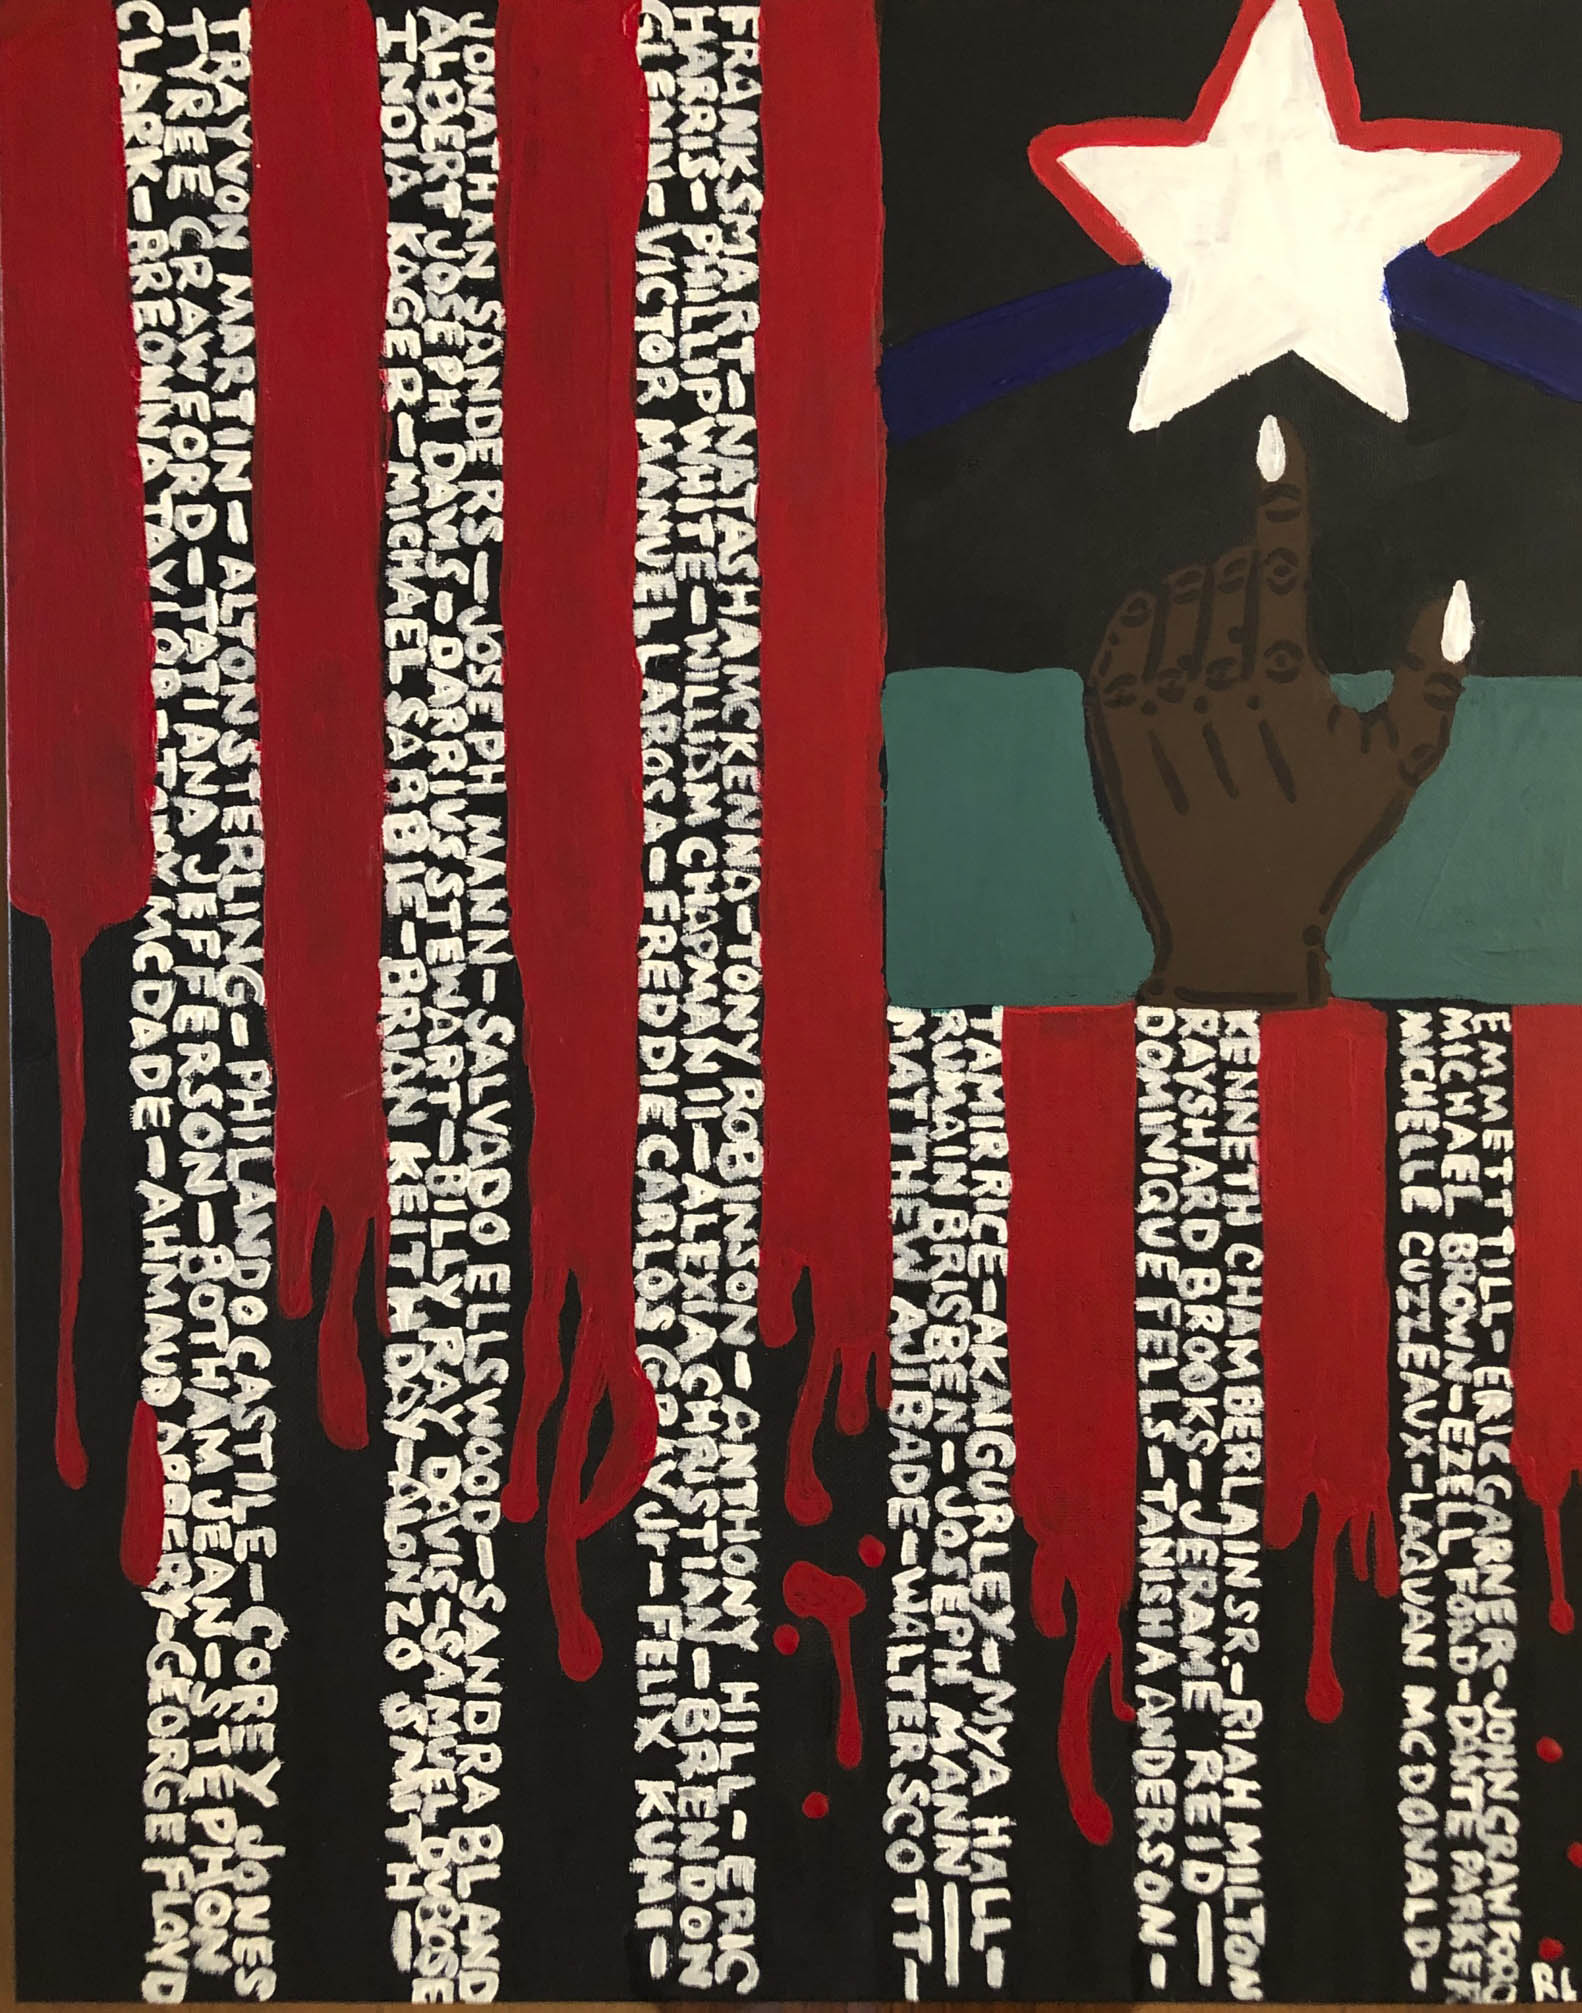 Flag made from names of slain Black people